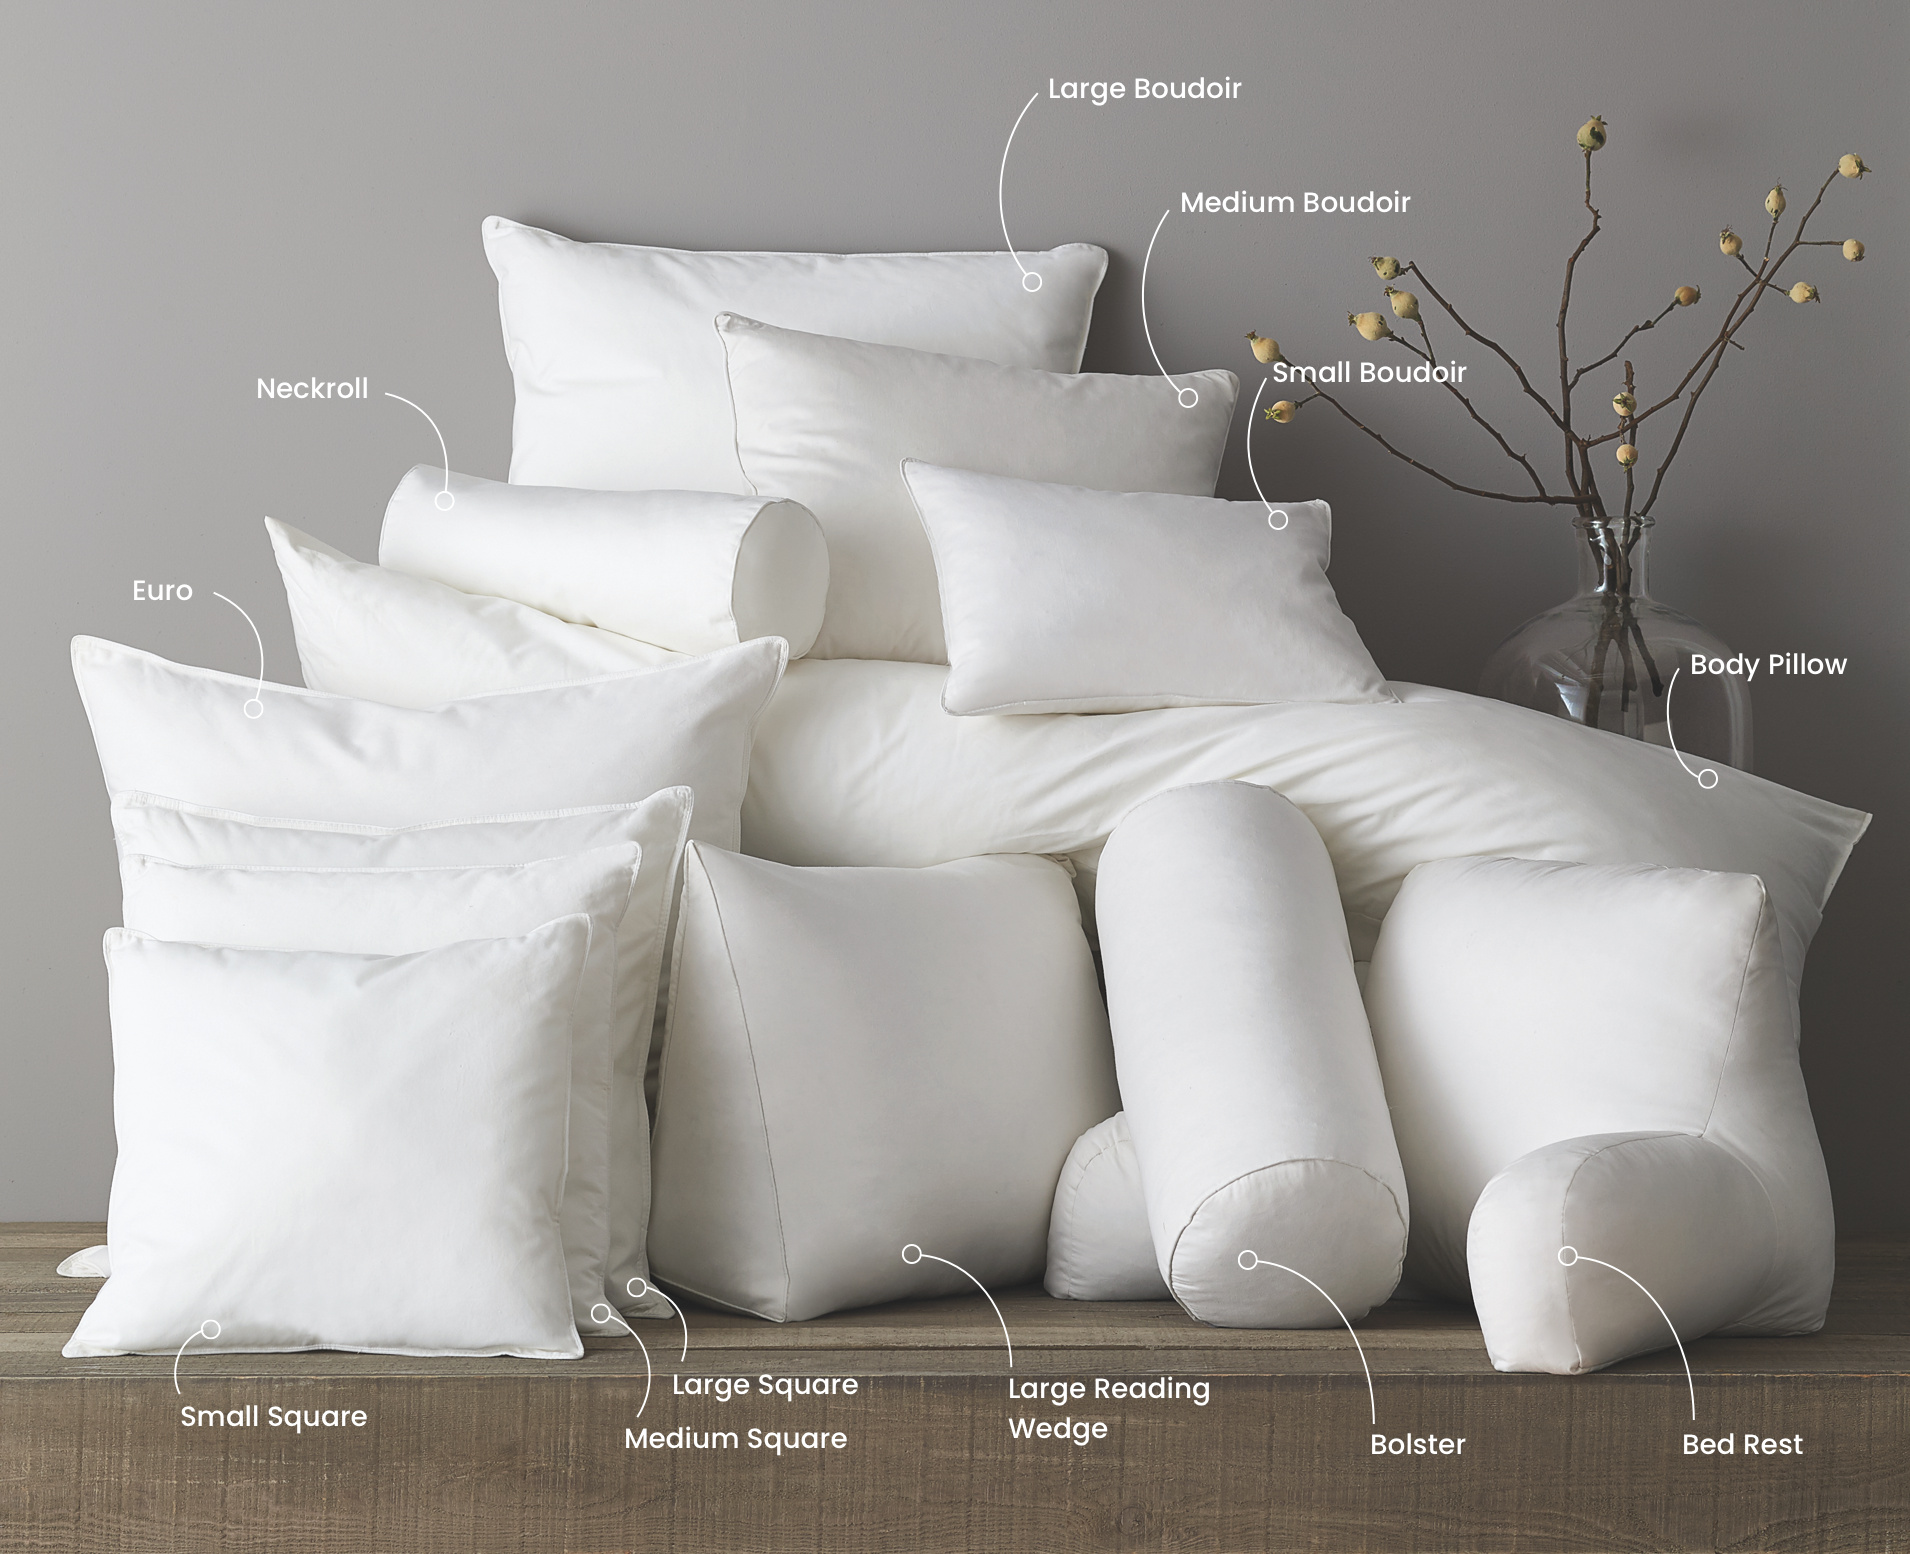 6 Types of Pillows You Find When Dating Someone New